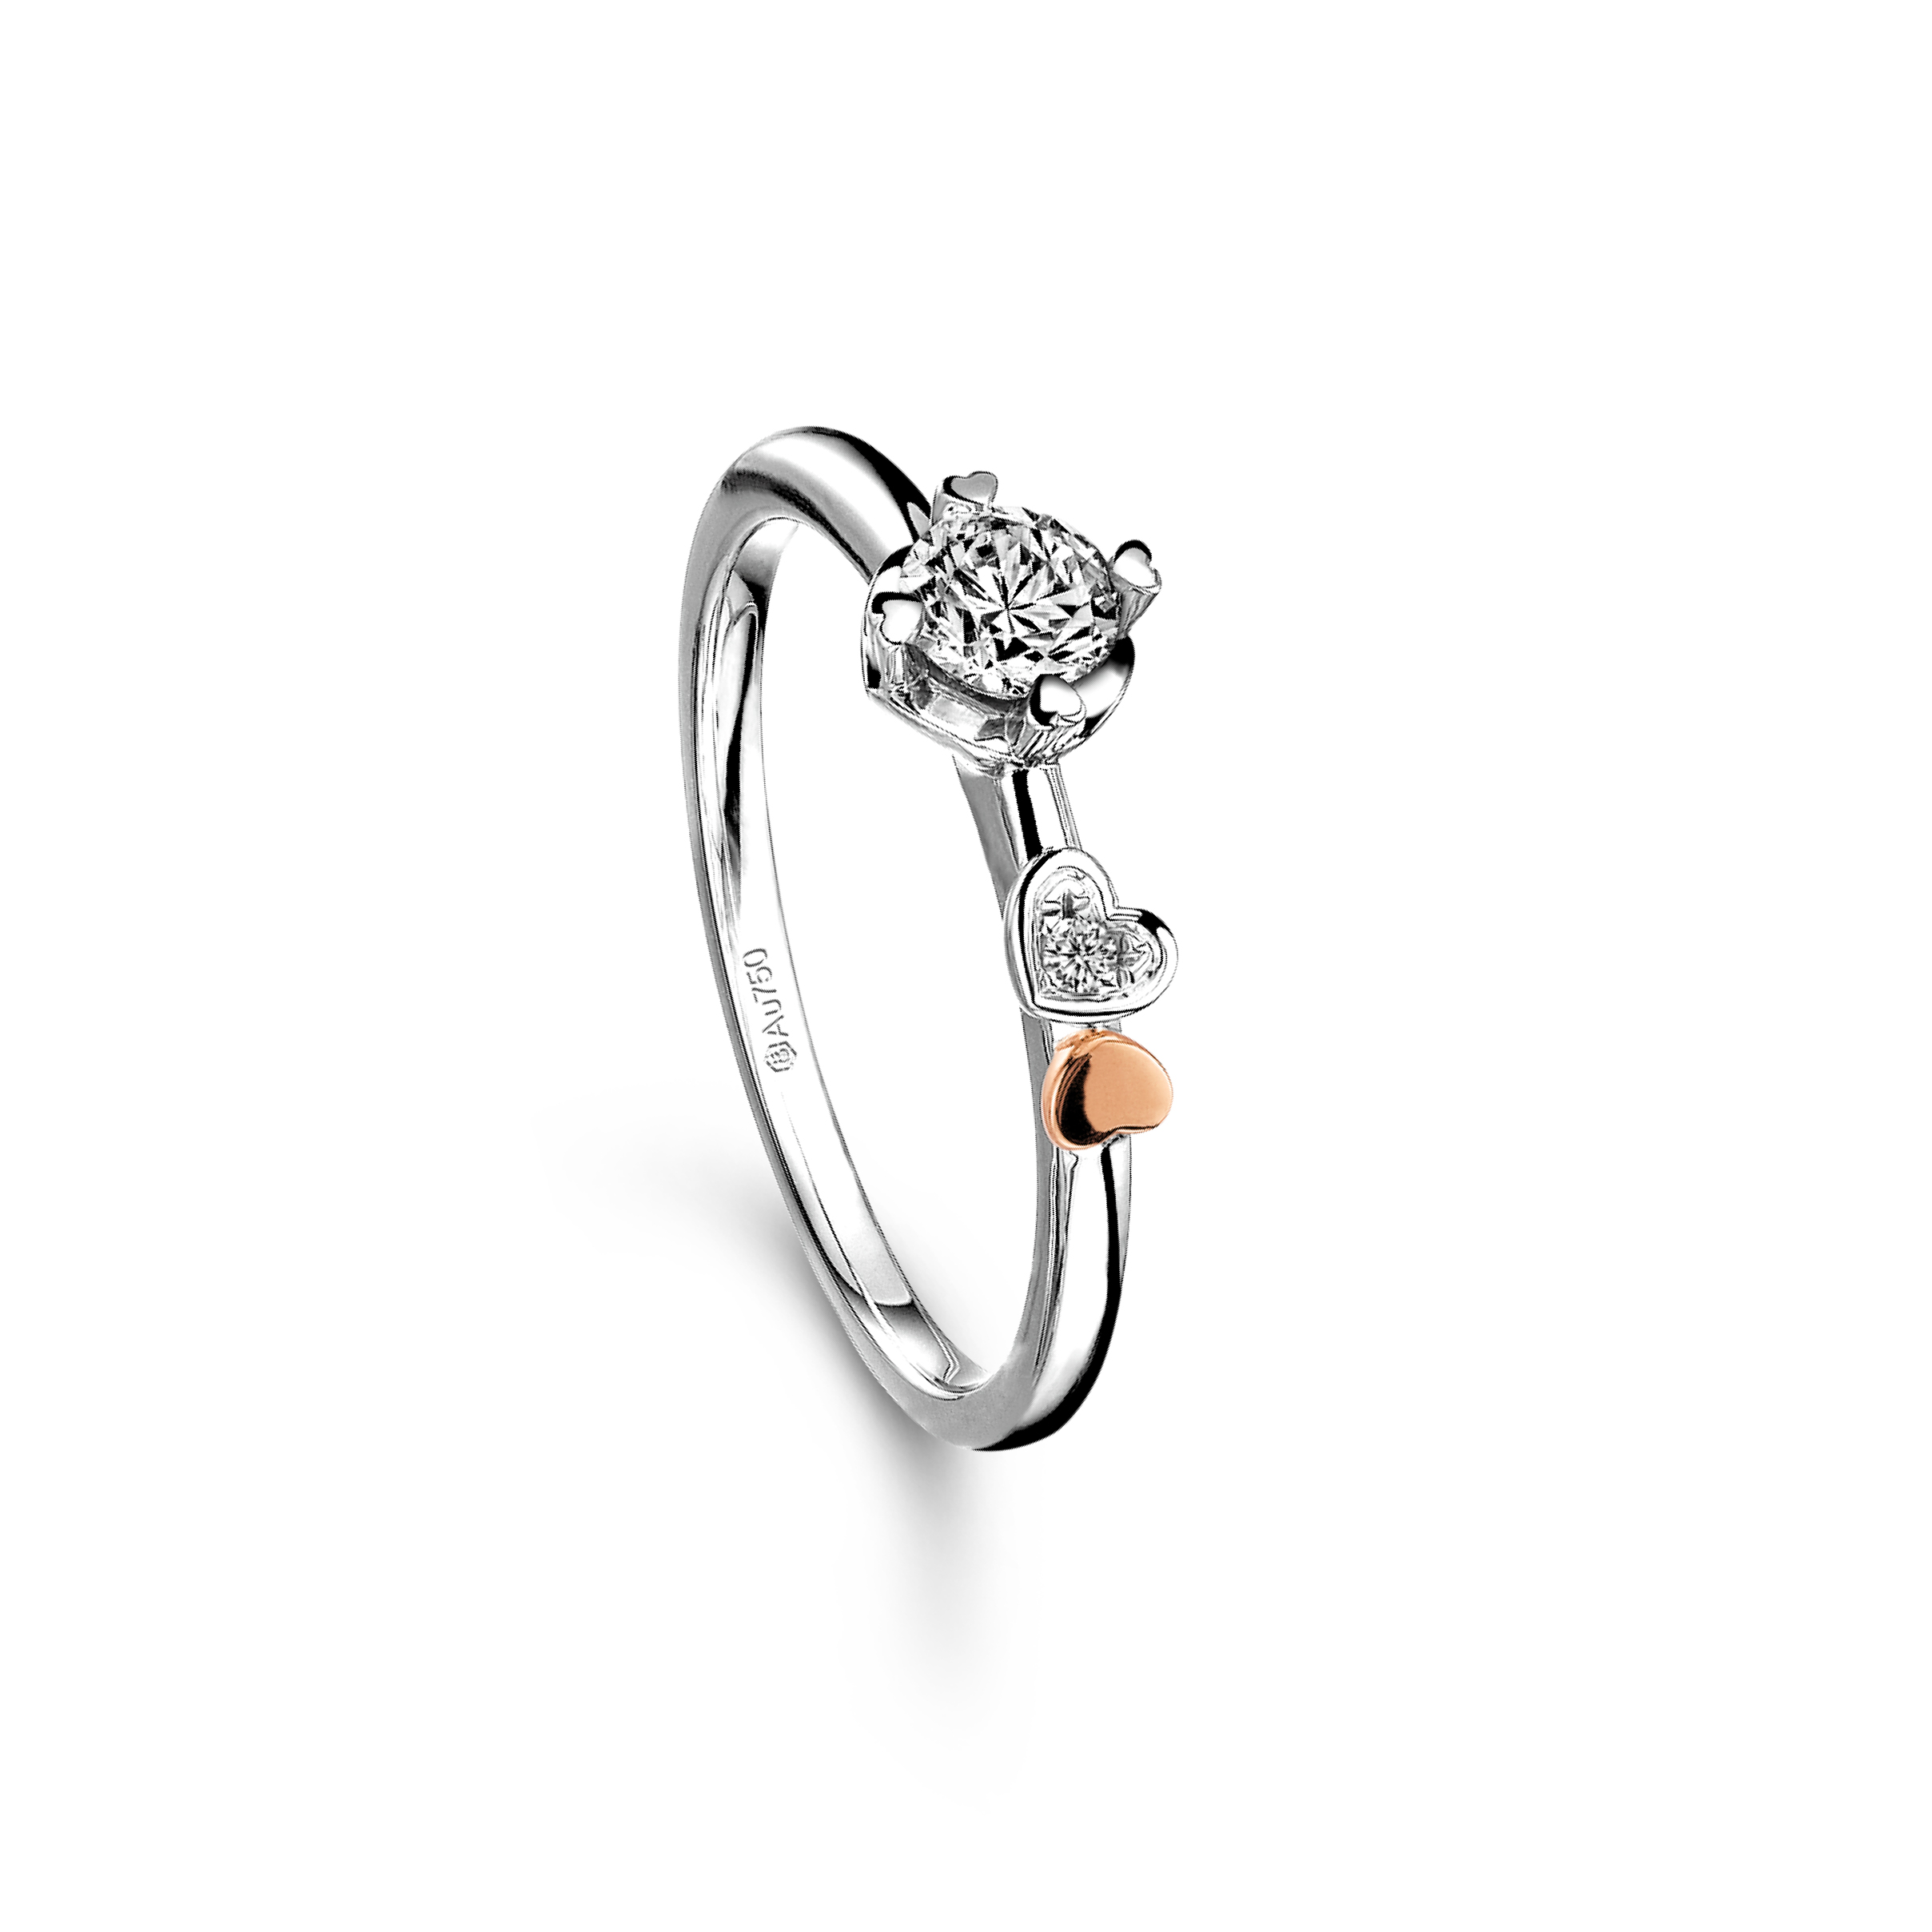 Love is Beauty Collection 18K Rose and White Gold Diamond Ring